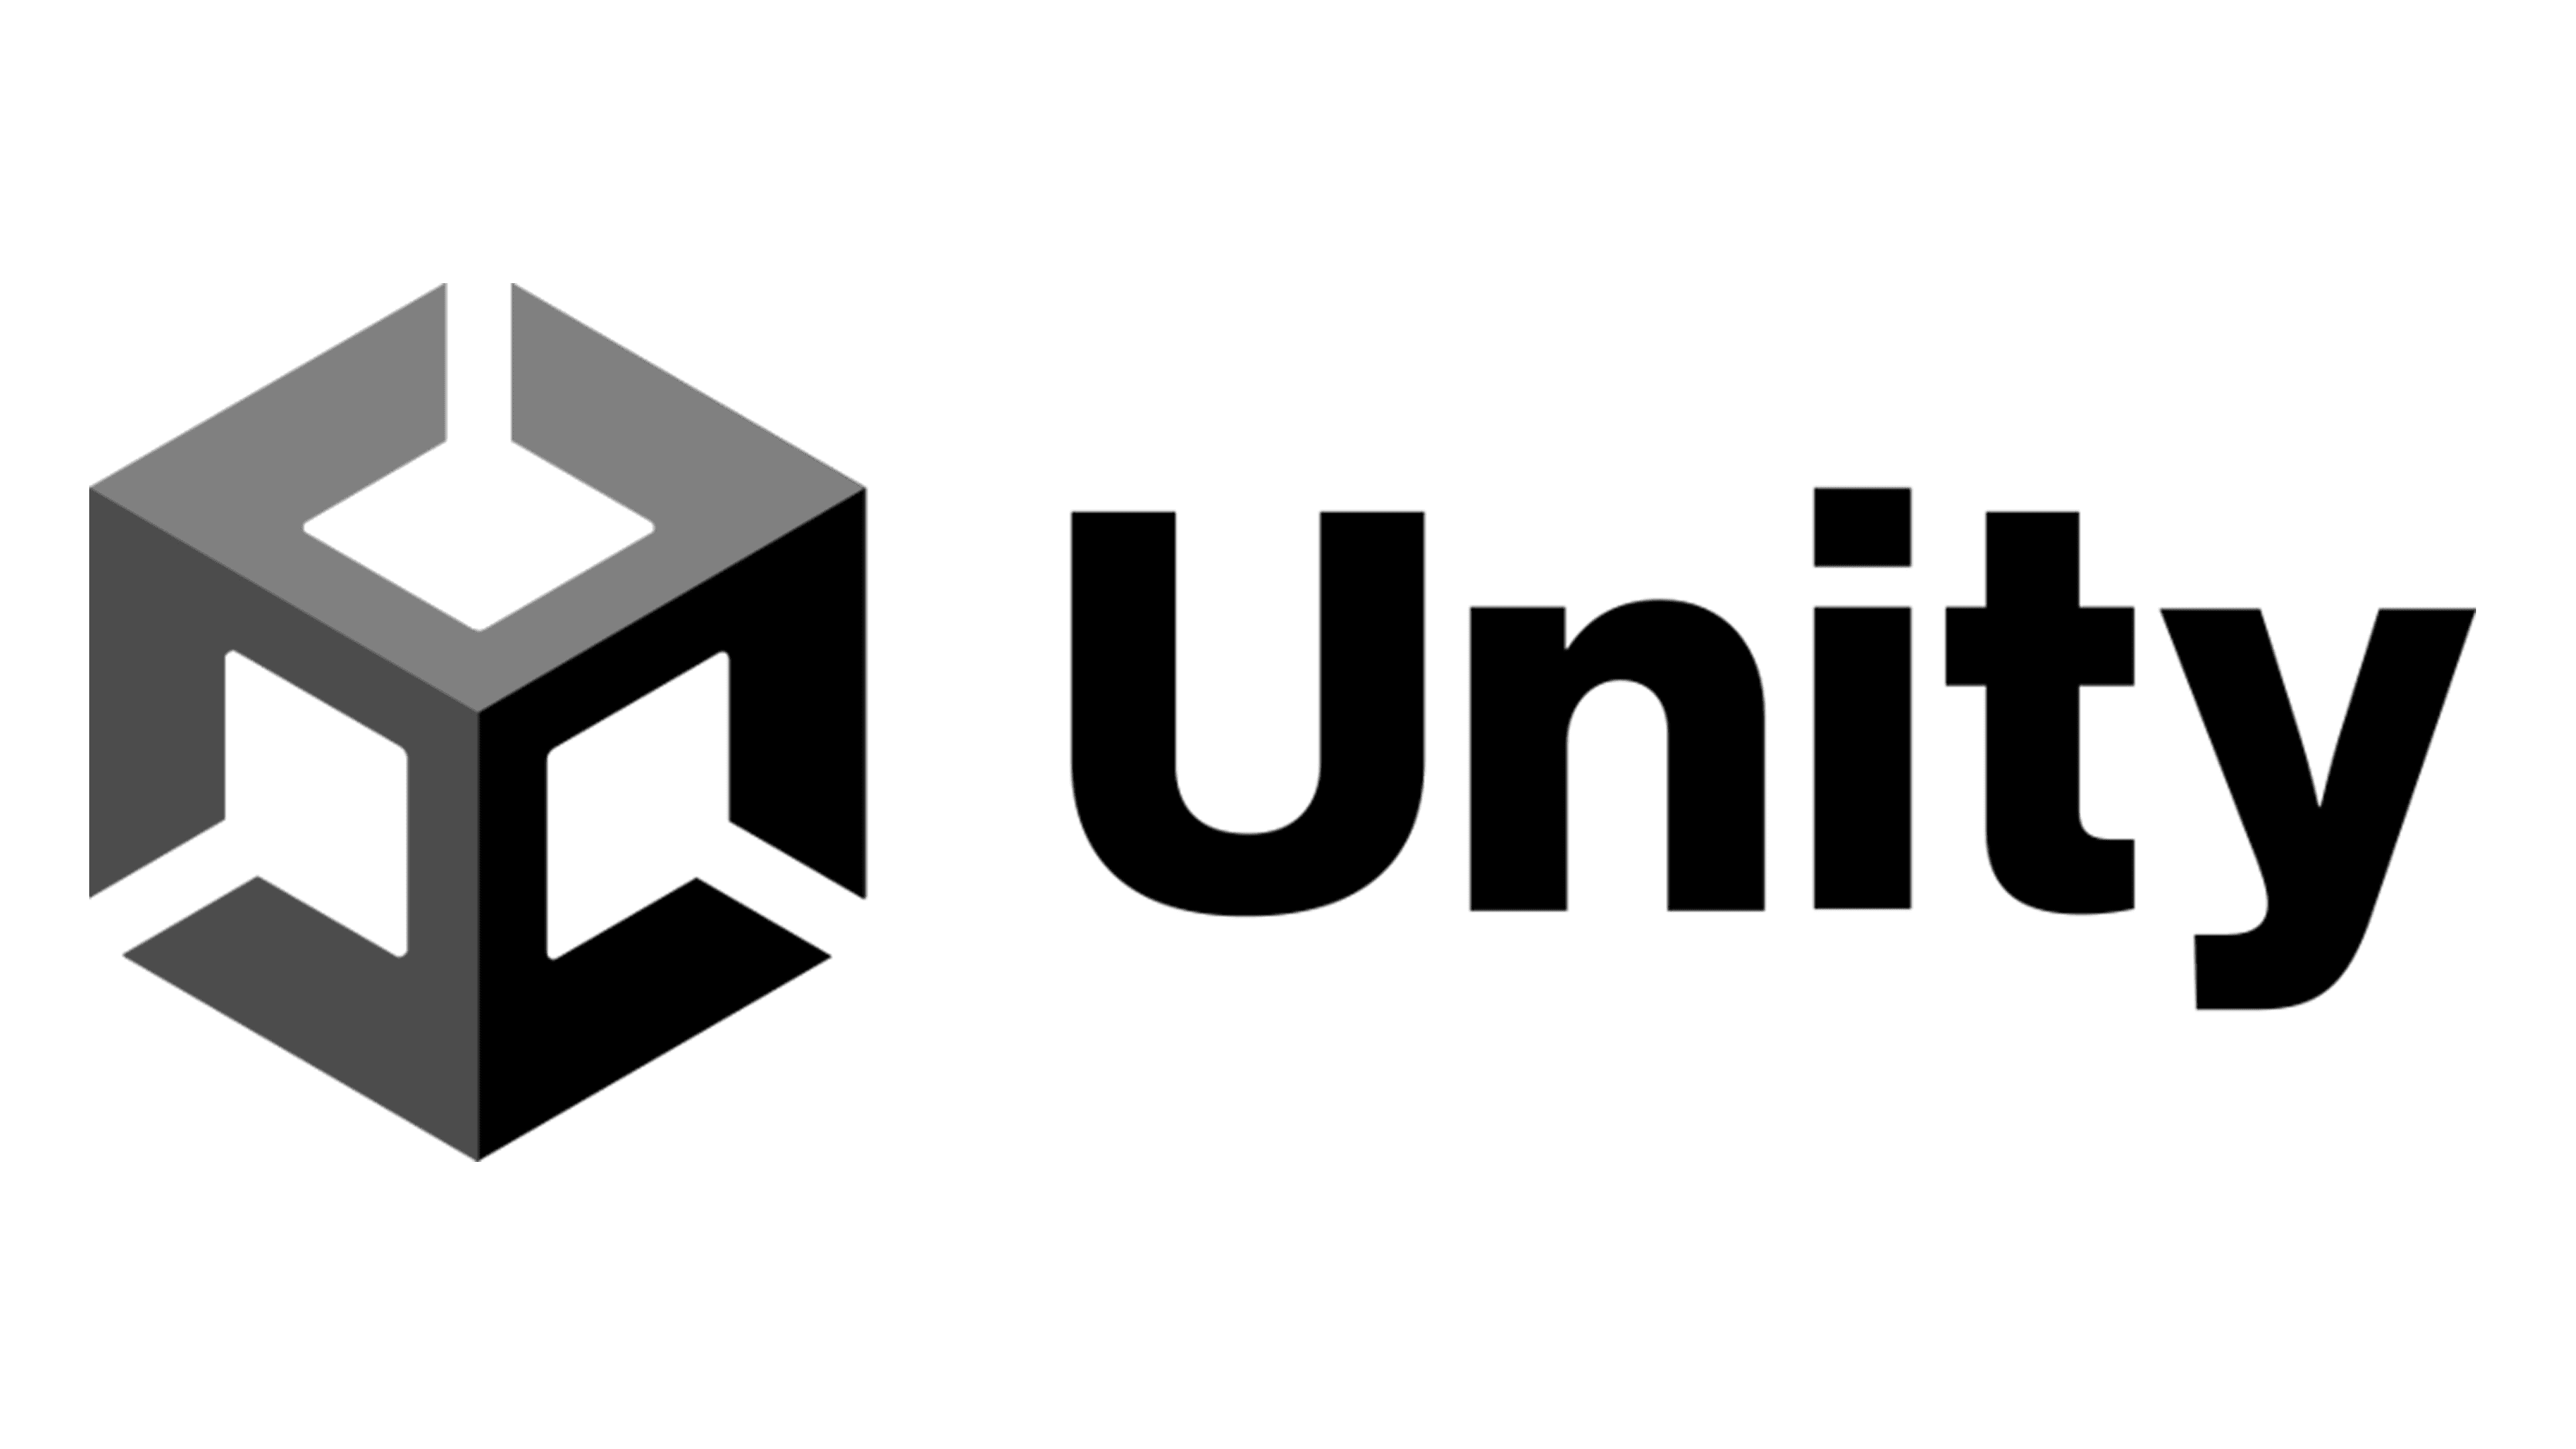 The old and the new Unity Logo by Martin Morpain on Dribbble